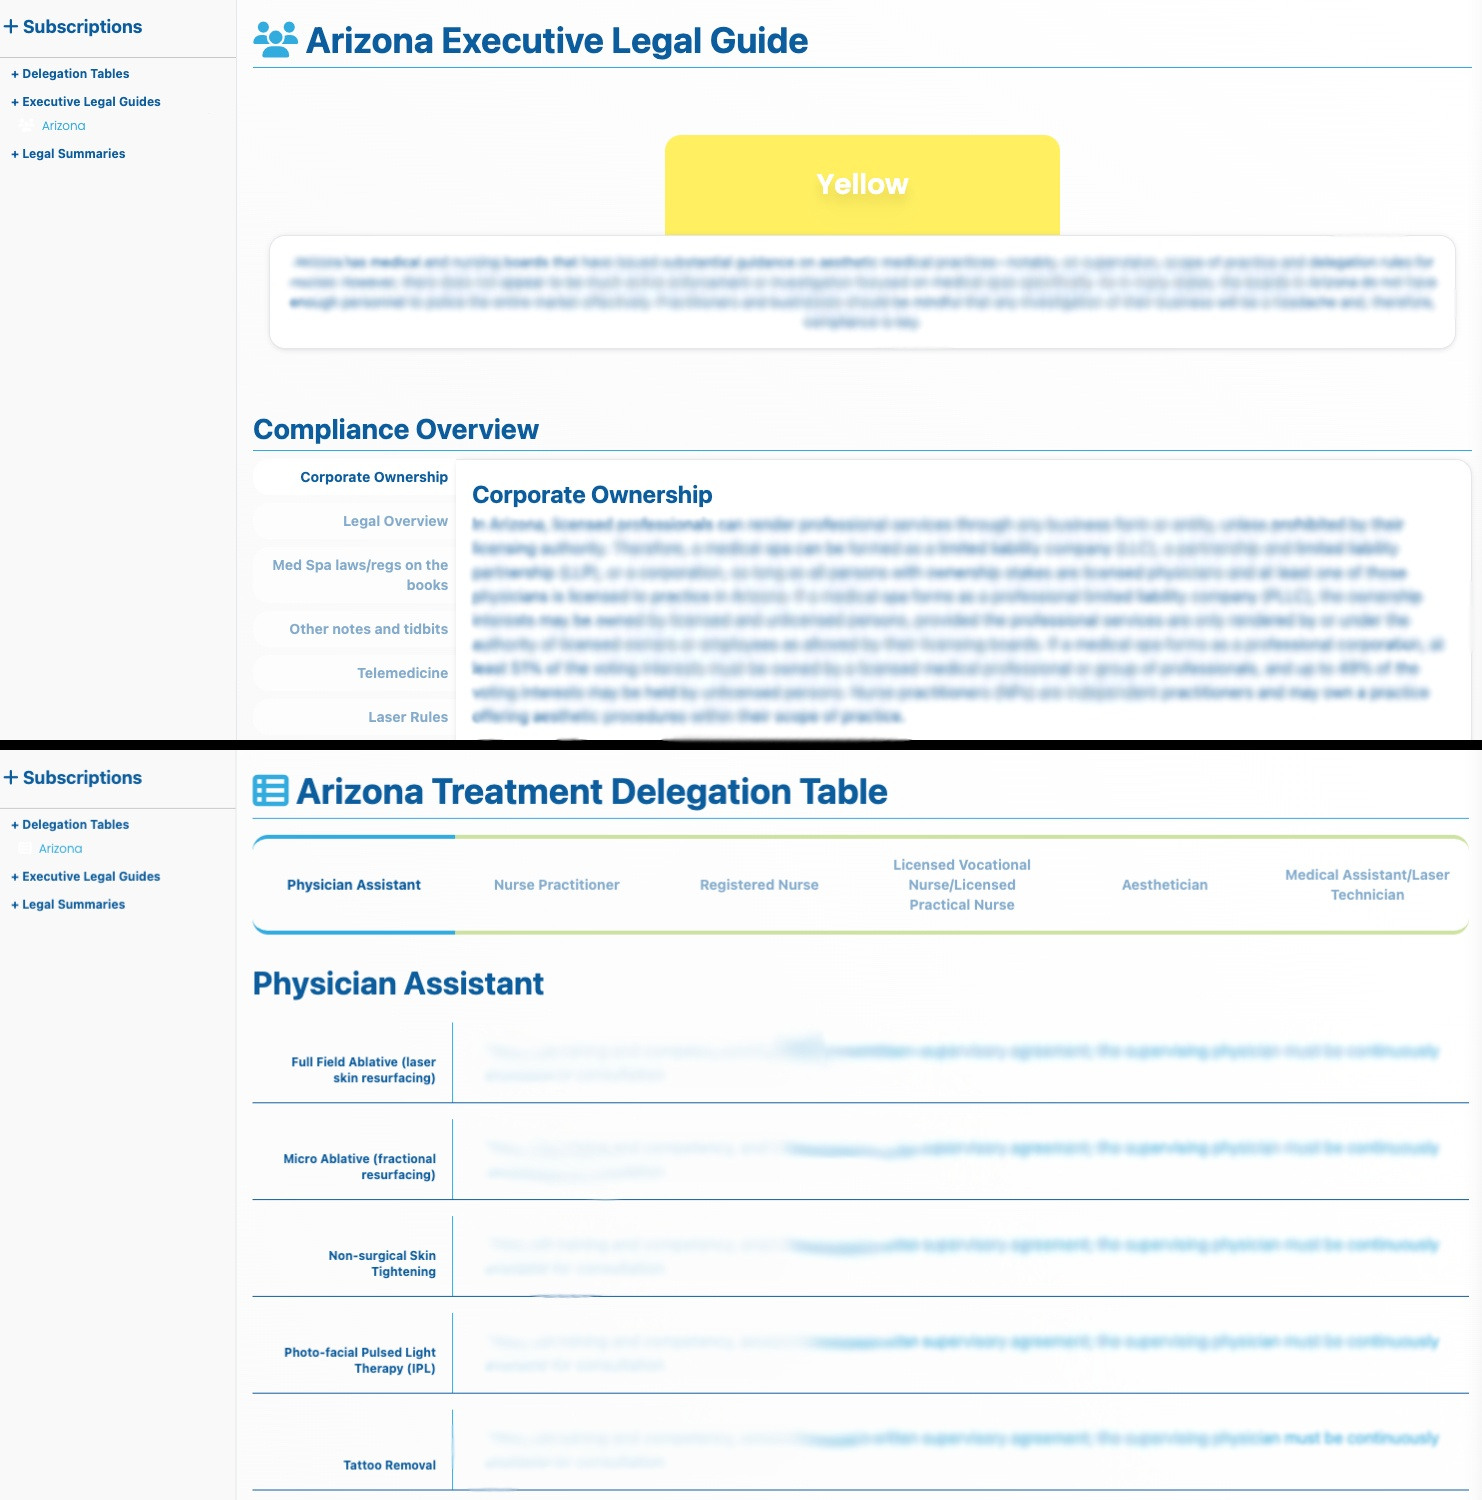 Sample Executive Legal Guide (Arizona) Compliance Overview, Delegation Table